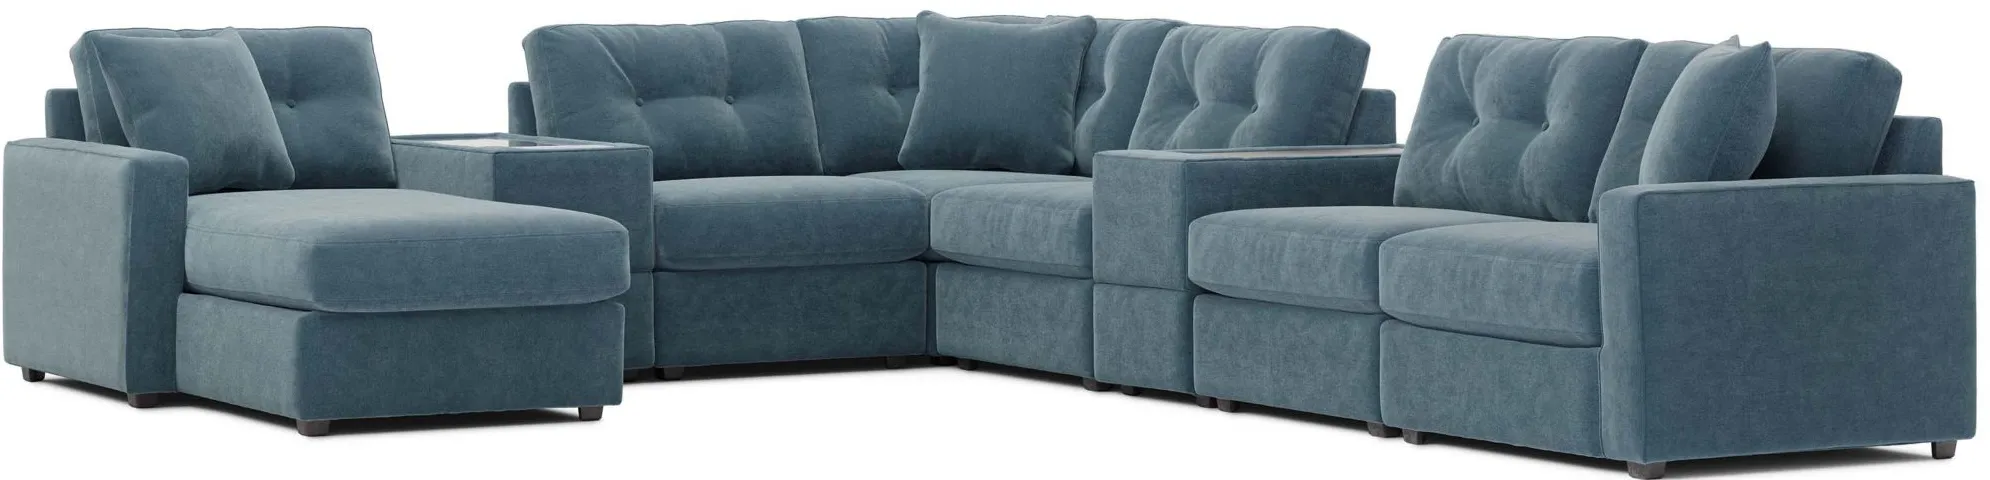 ModularOne 8-pc. Sectional in Teal by H.M. Richards